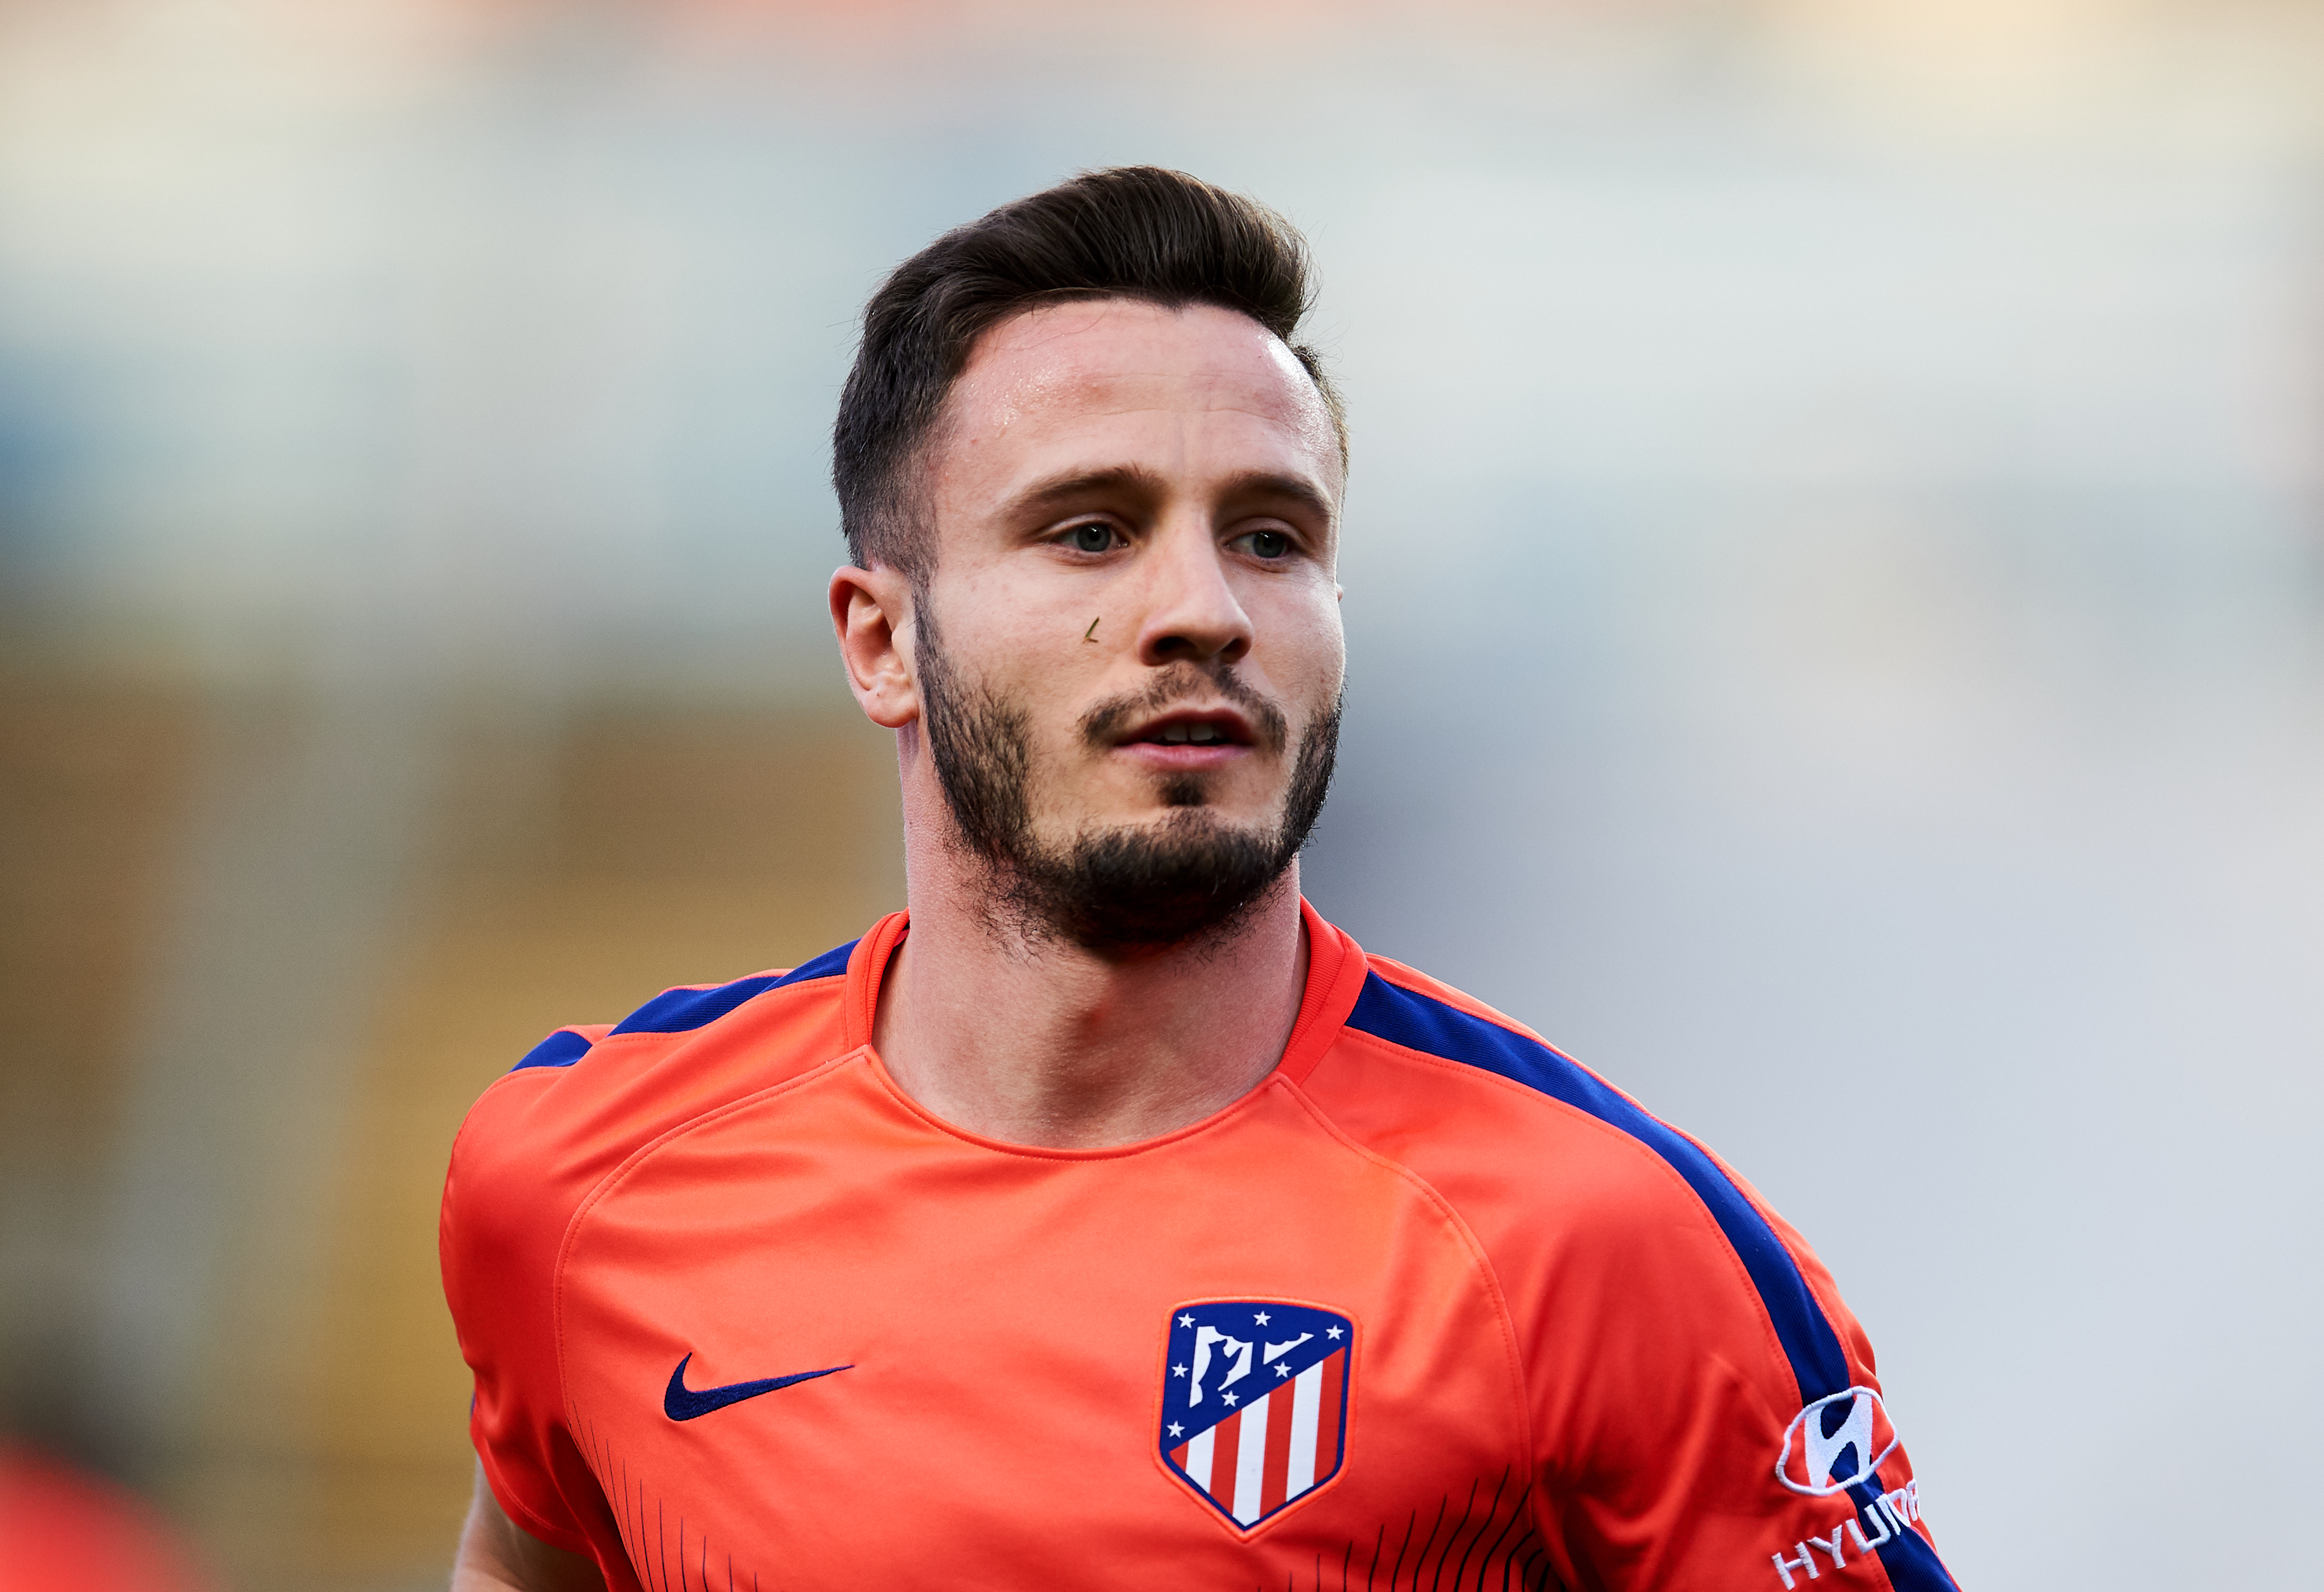 Could Saul Niguez be the latest Atletico Madrid player to make his way to Camp Nou? (Photo by Juan Manuel Serrano Arce/Getty Images)